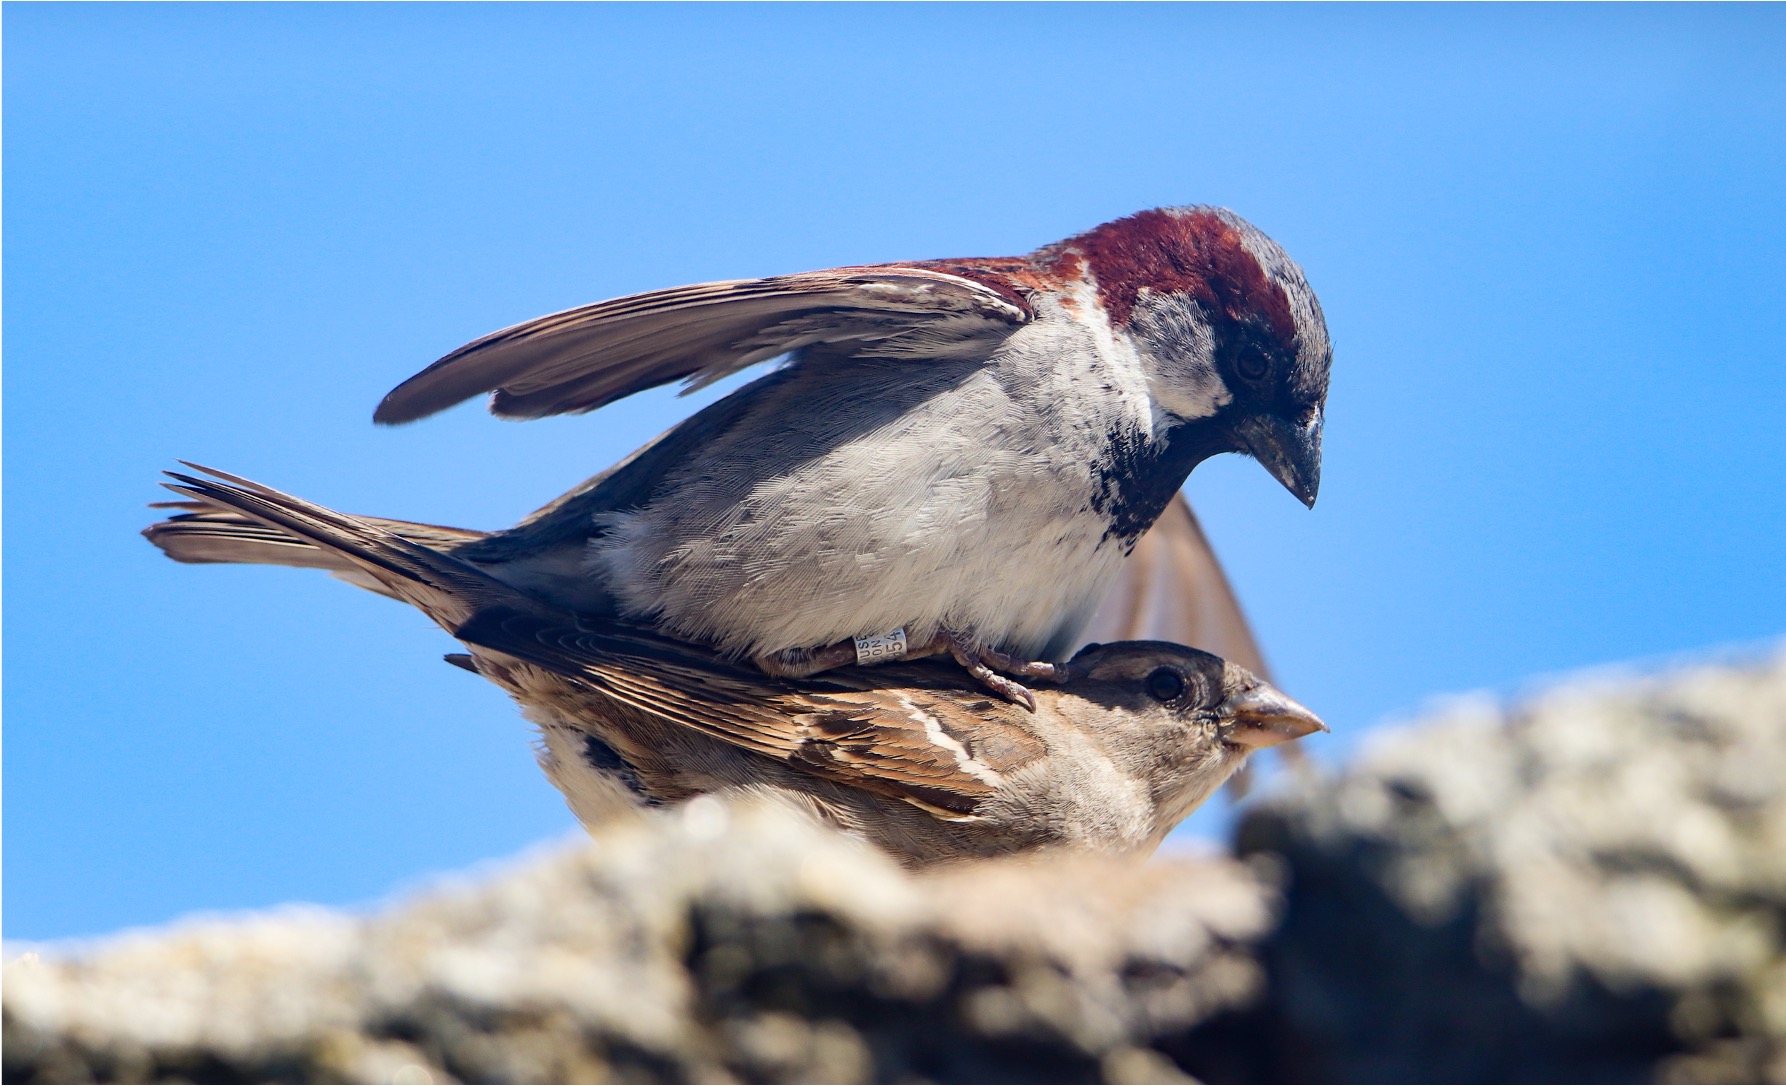 Metal-ringed house sparrows on Lundy island. H.Y.J Chik. 2021.